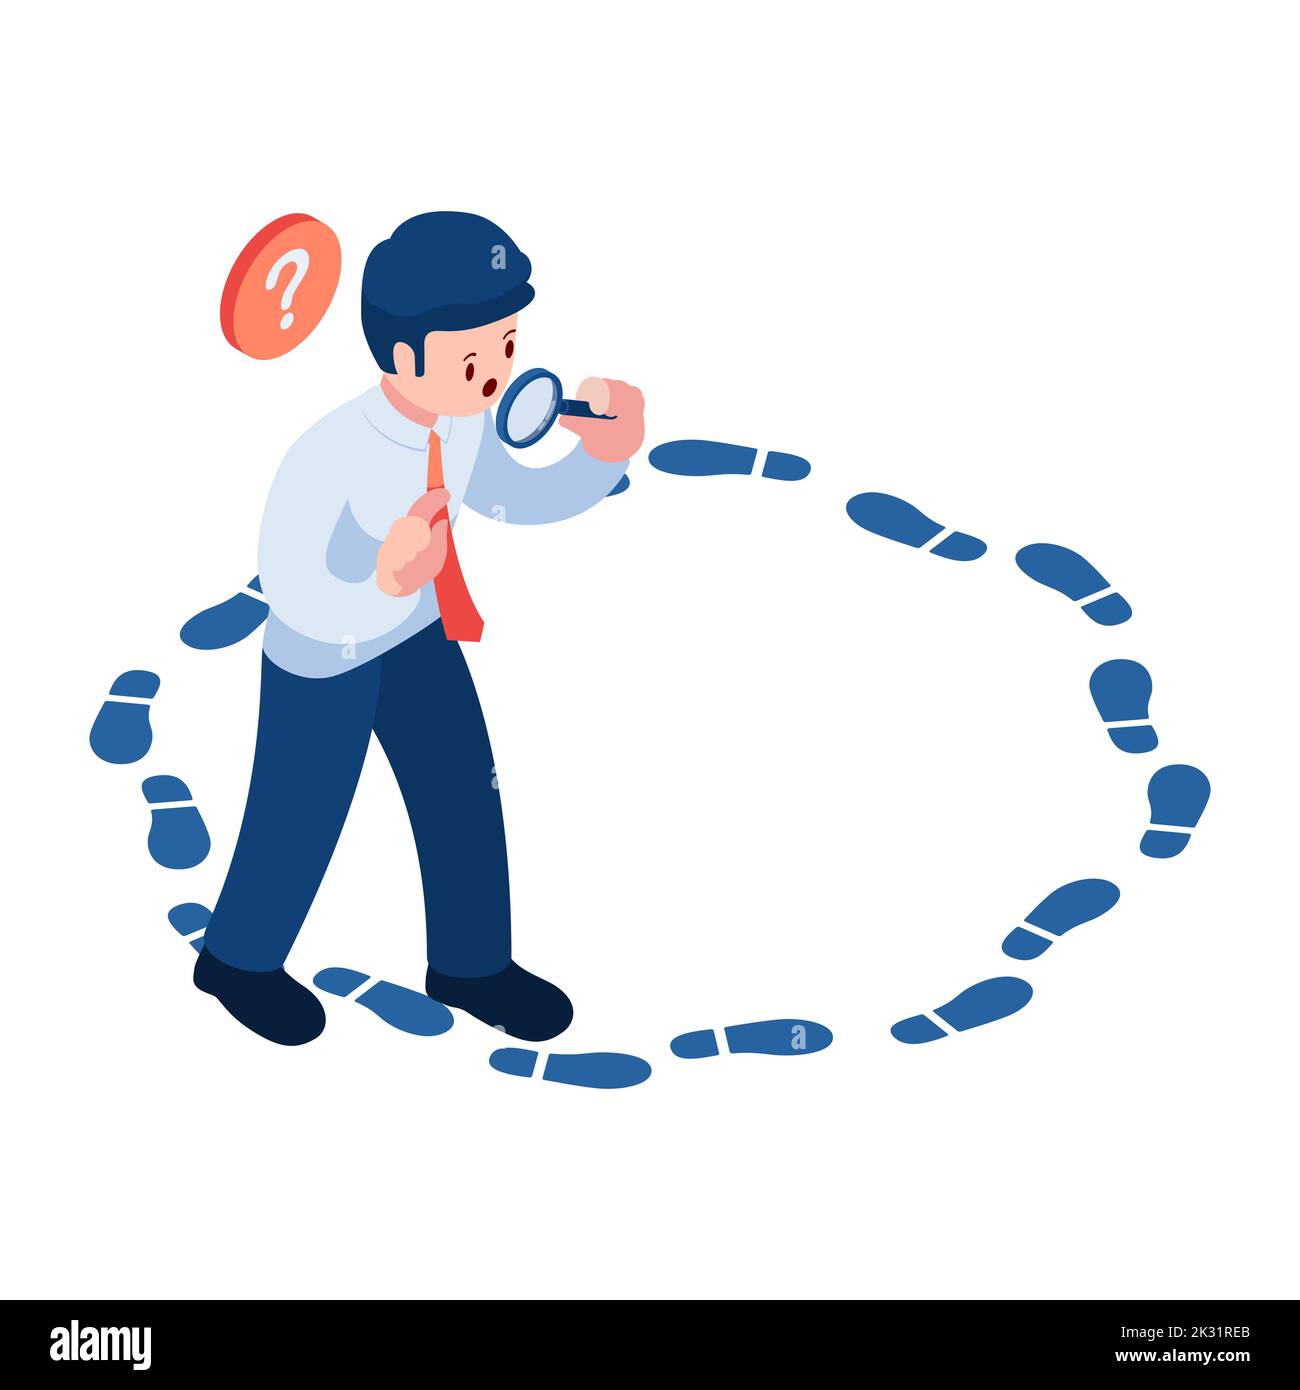 Flat 3d Isometric Businessman with Magnifying Glass Analyze Circle Footstep. Loop Routine Job and Dead-End Job Concept. Stock Vector